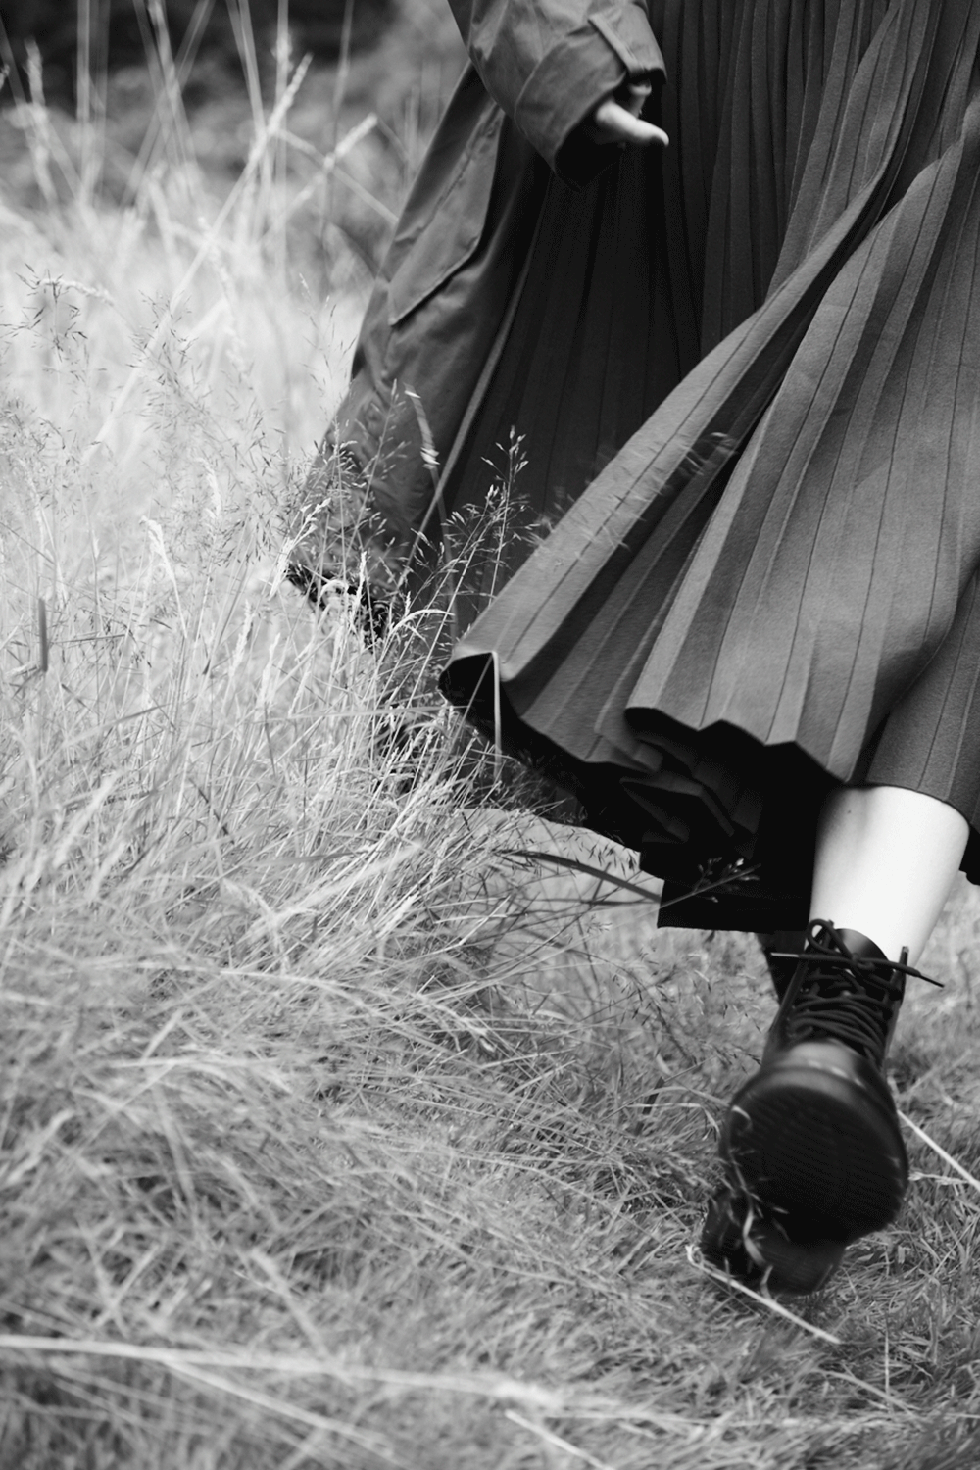 Human leg, People in nature, Monochrome, Grass family, Calf, Foot, Ankle, Sandal, High heels, Boot, 